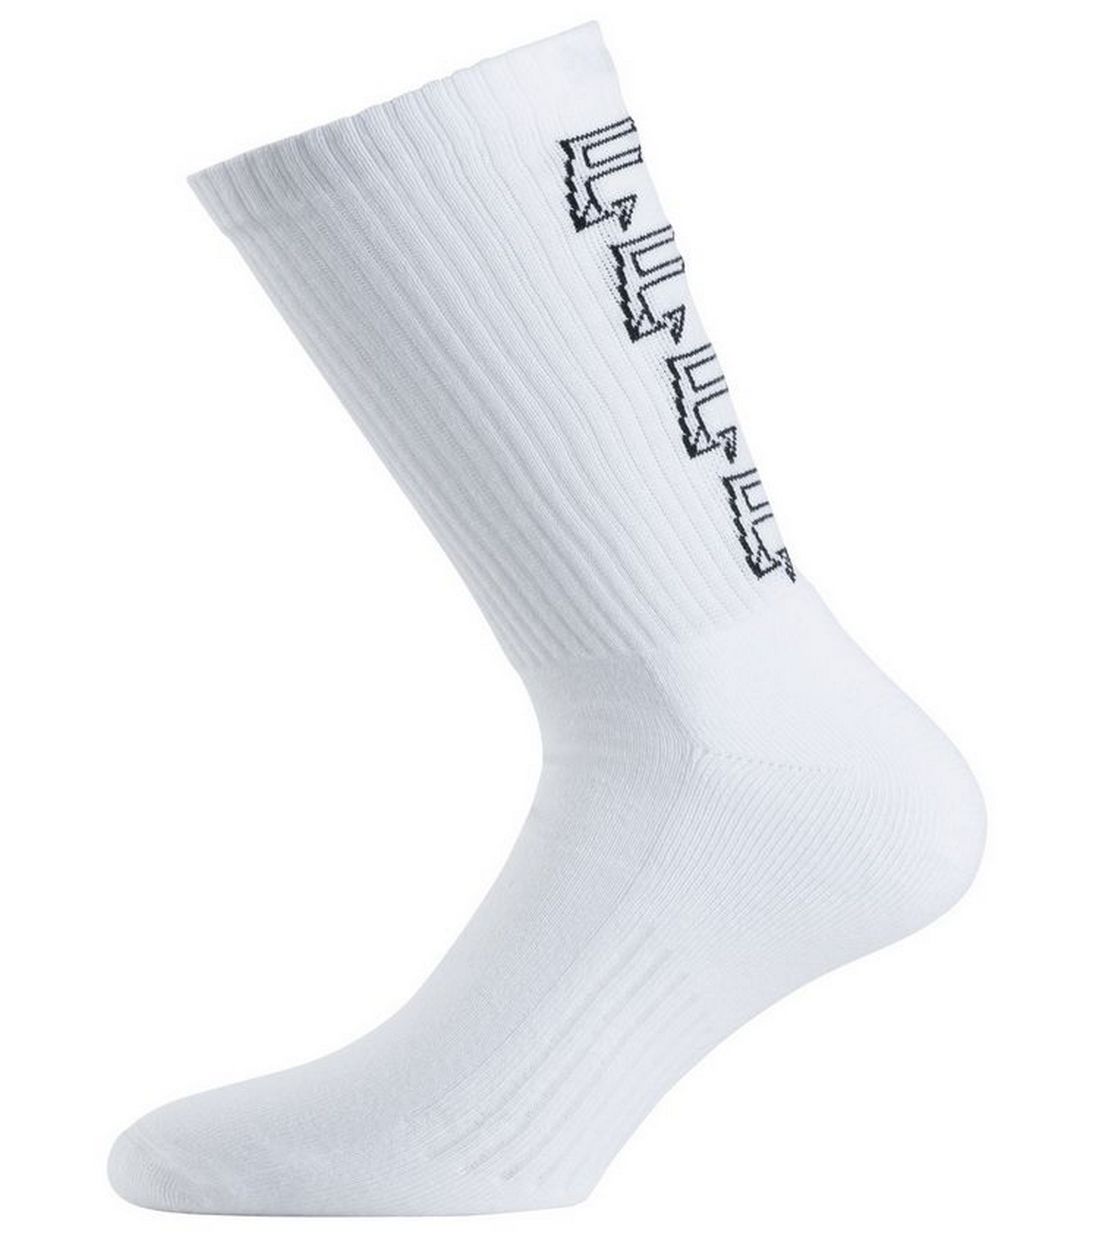 FORCE XV CHAUSSETTES DE RUGBY AUTHENTIC FORCE Blanc